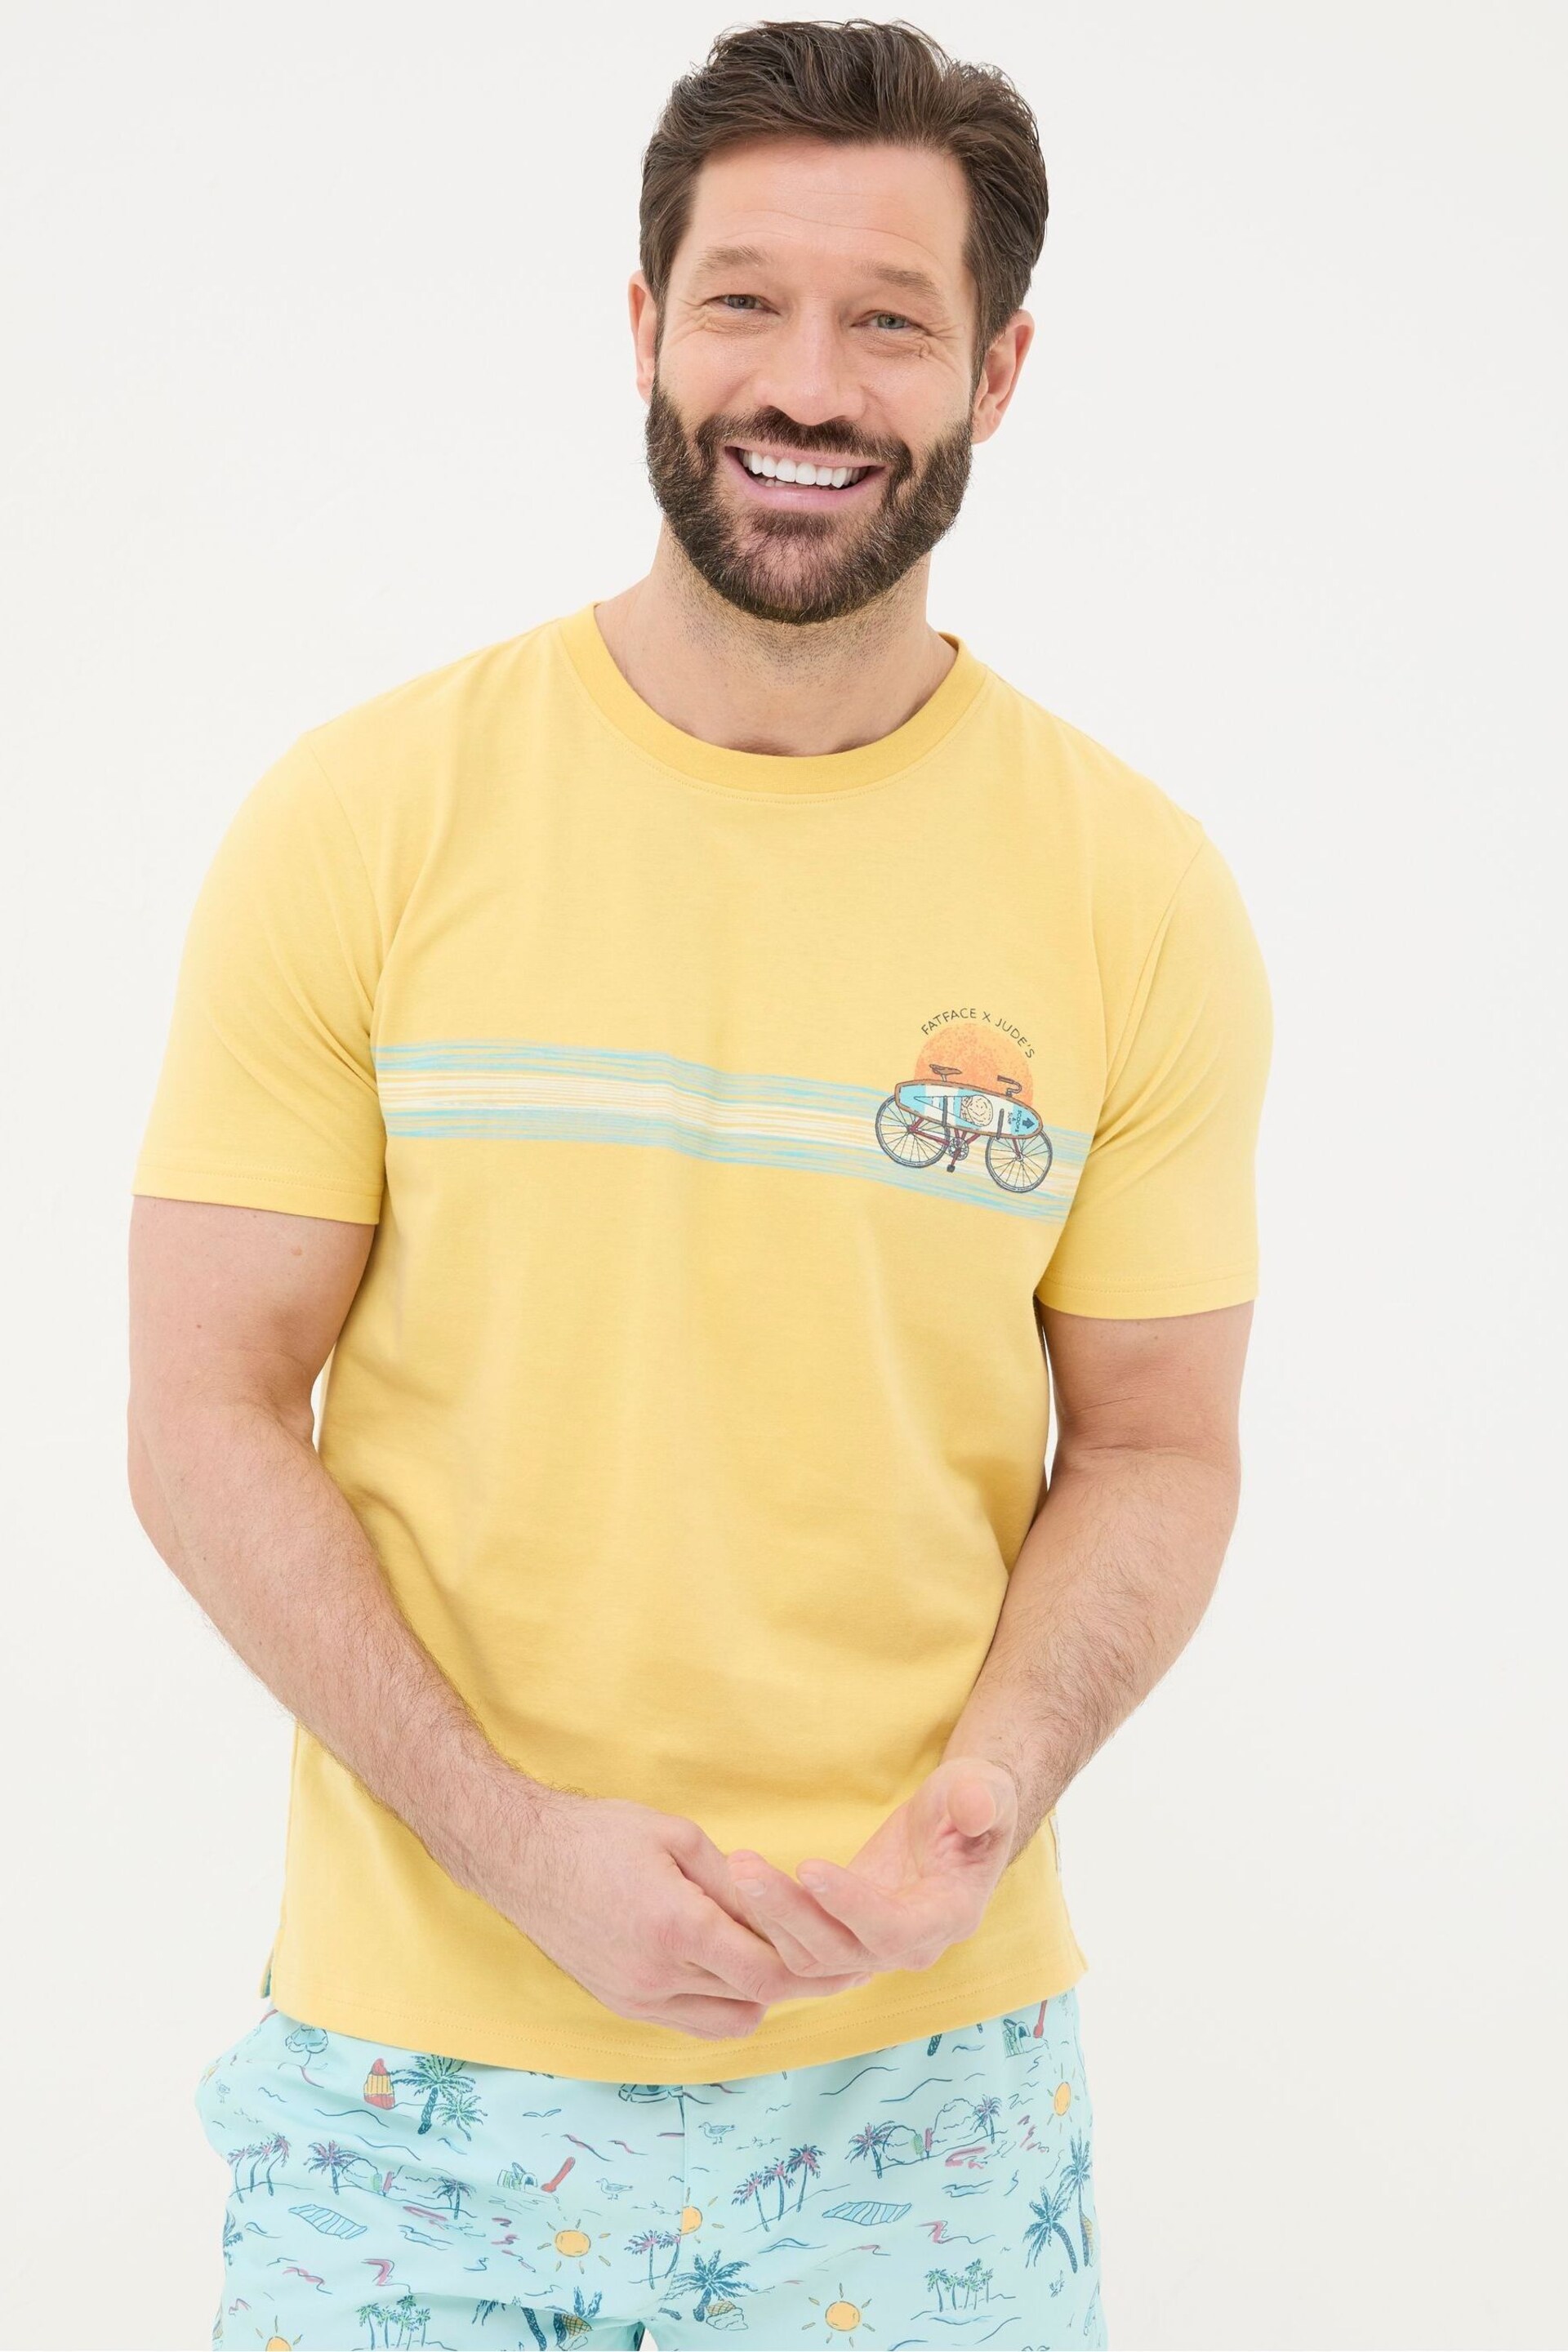 FatFace Yellow Chest Stripe T-Shirt - Image 1 of 5